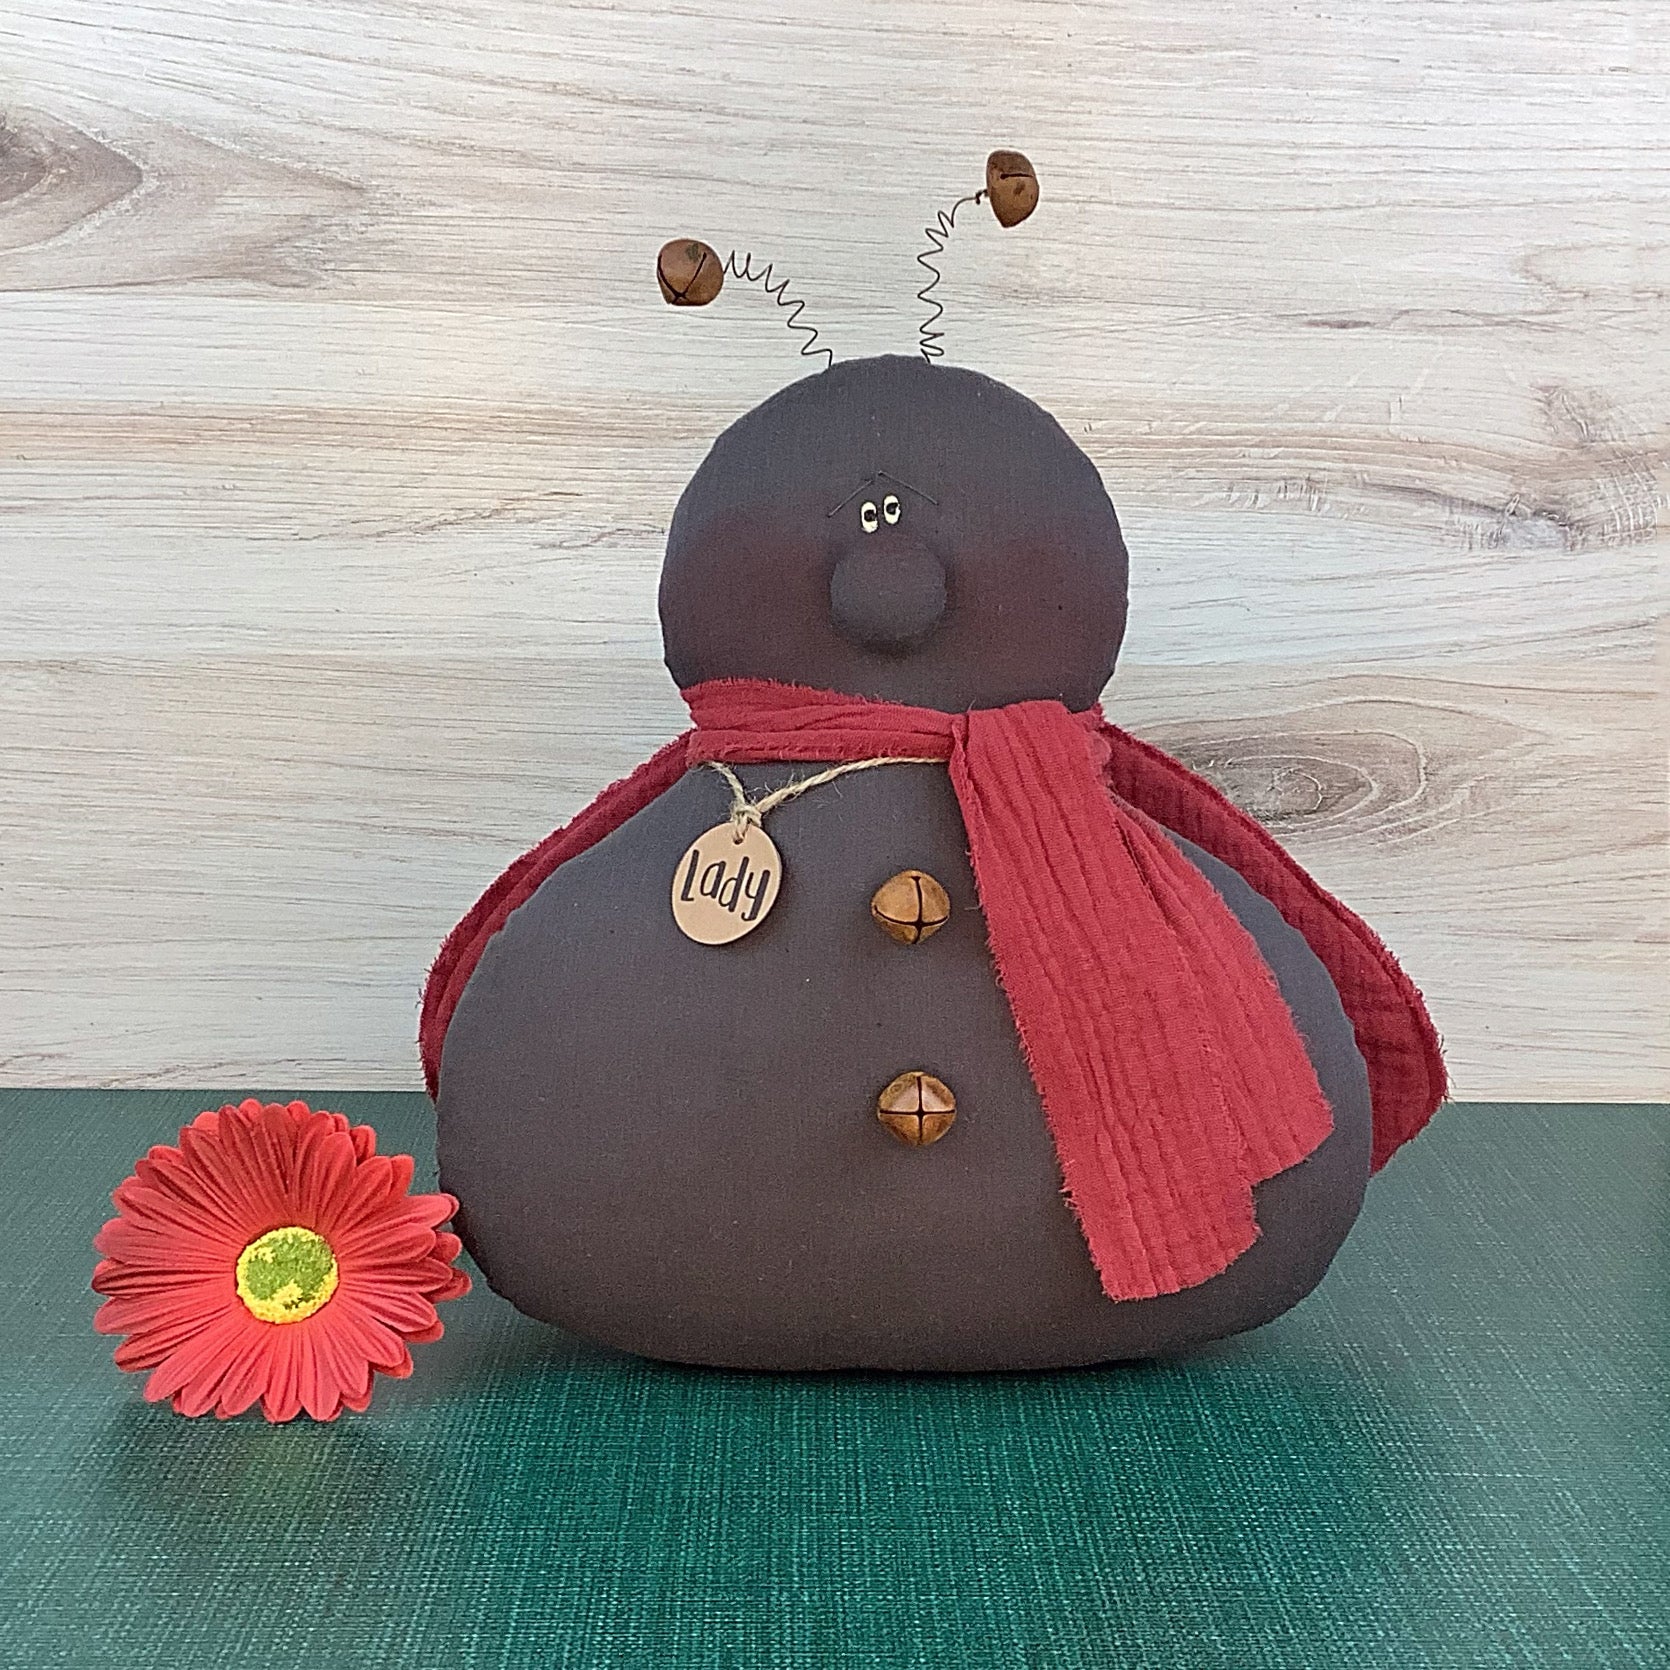 Lady the Ladybug Pillow- Handmade Whimsical Ladybug Pillow Soft Sculpture Collectible Spring & Summer Décor by Honey and Me, Inc™